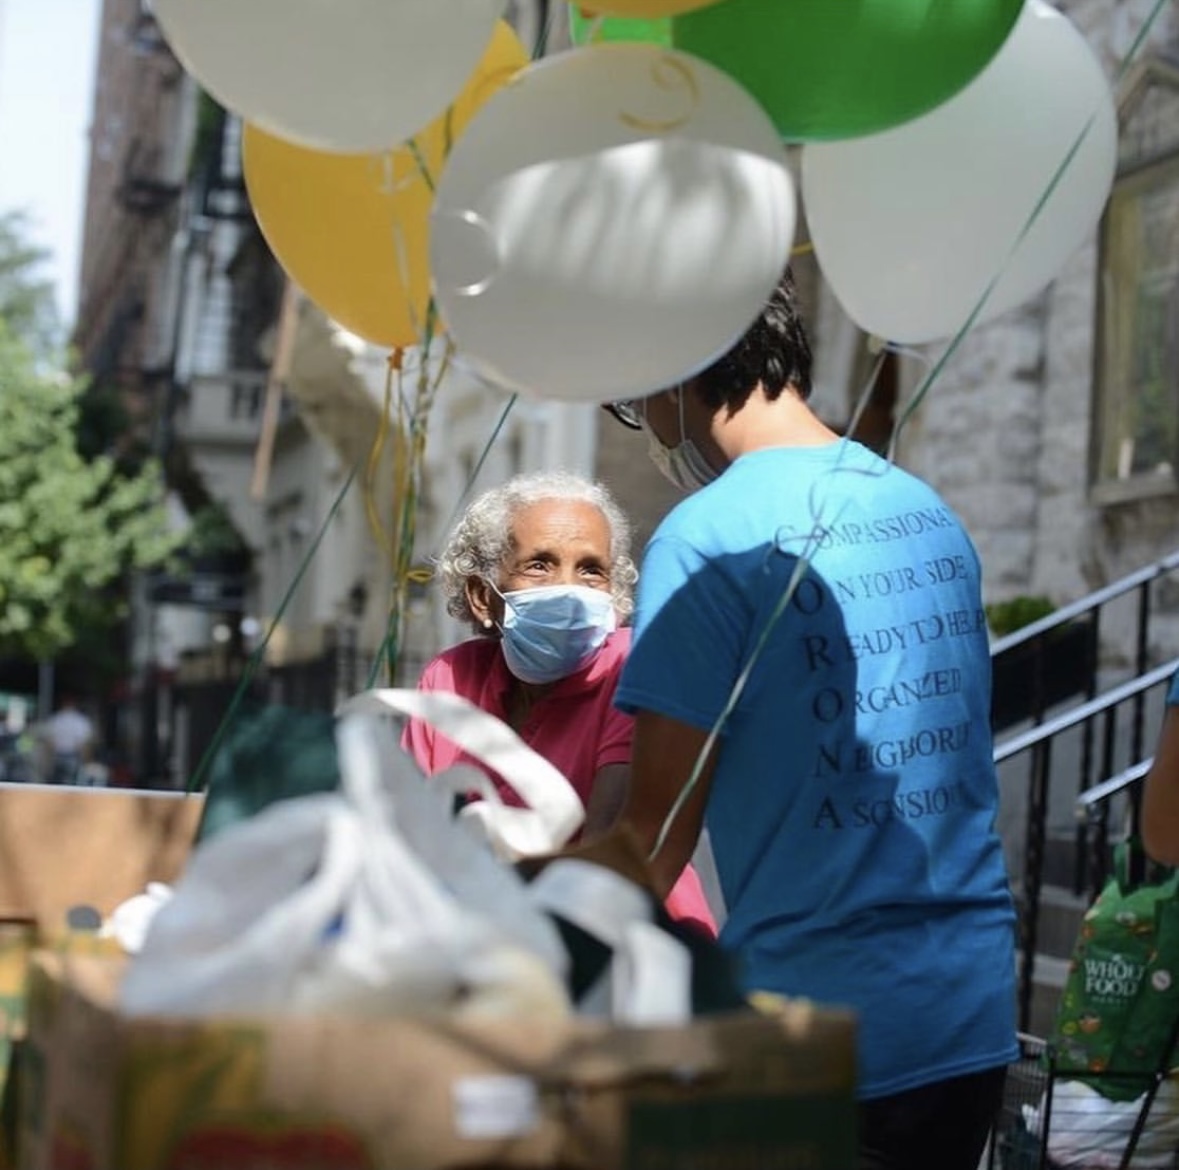 A volunteer helps a client at the food pantry. (Photo Credit: Used by permission from @theimaginesociety)